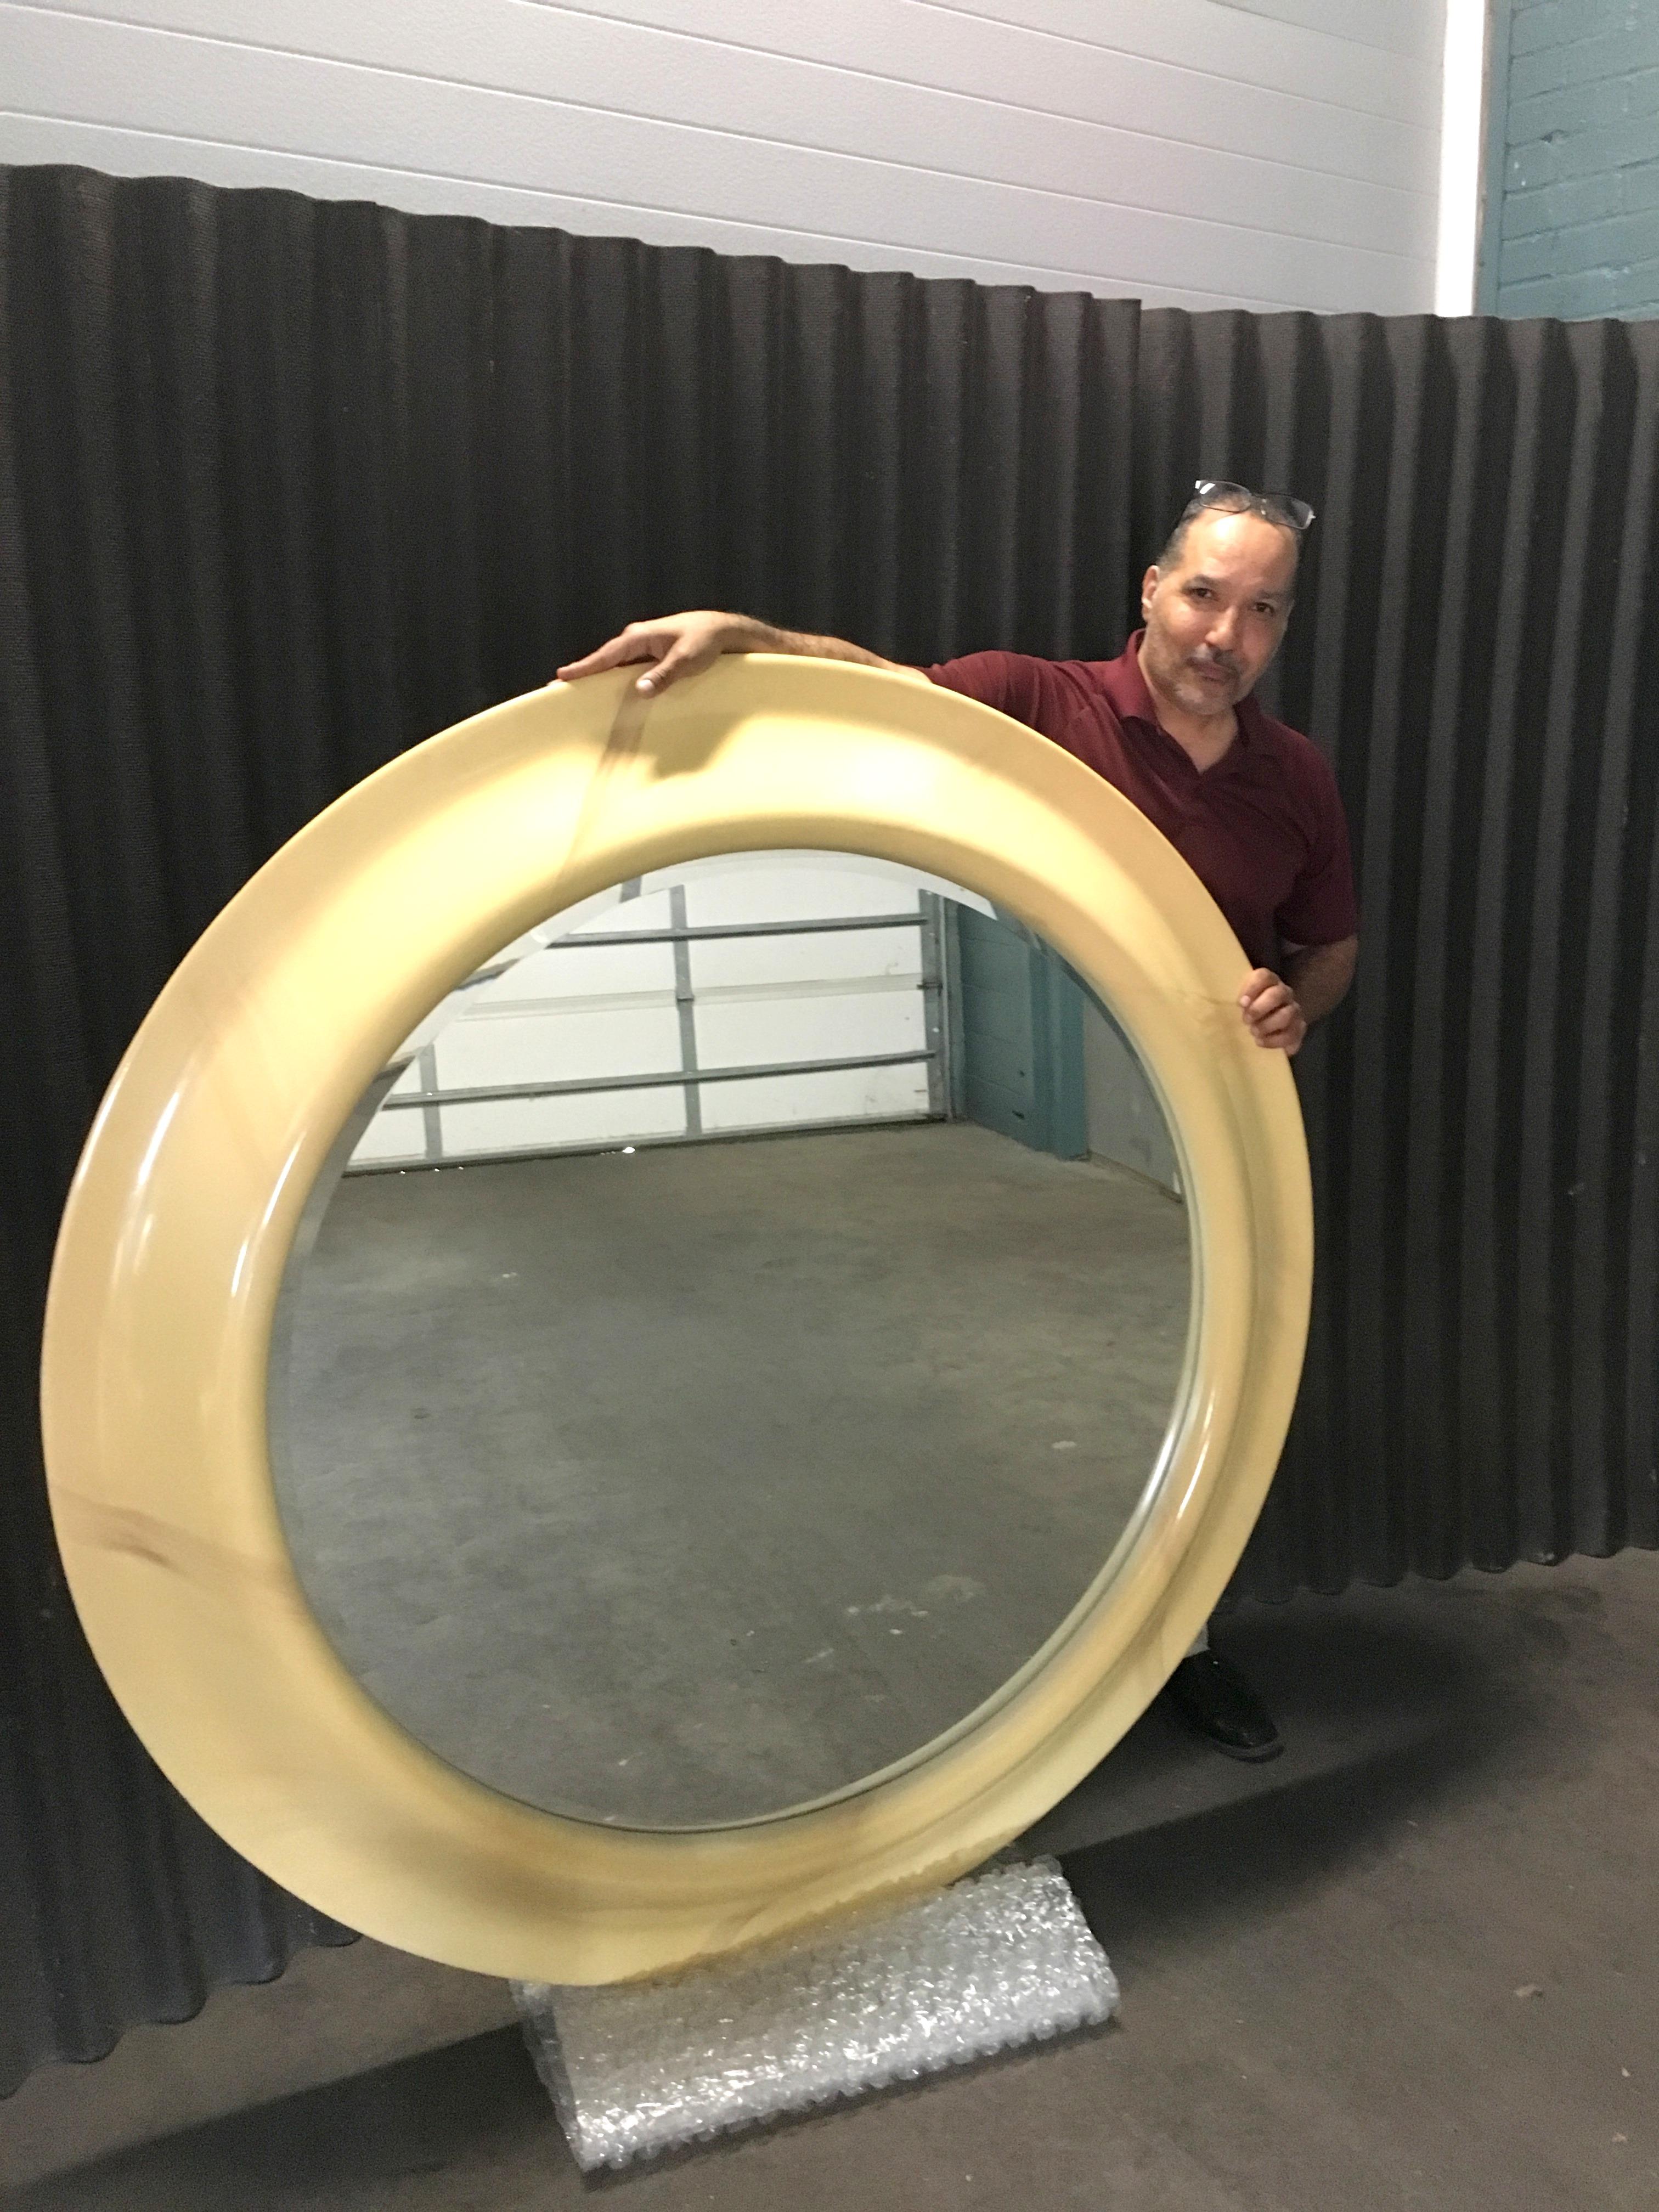 Go big or go home!
This is one incredibly huge mirror and I love it!
In excellent condition with no breakage anywhere.
Clean mirror/glass with no fogging.
A perfect piece that requires a good wall to host it!

Measures: 54